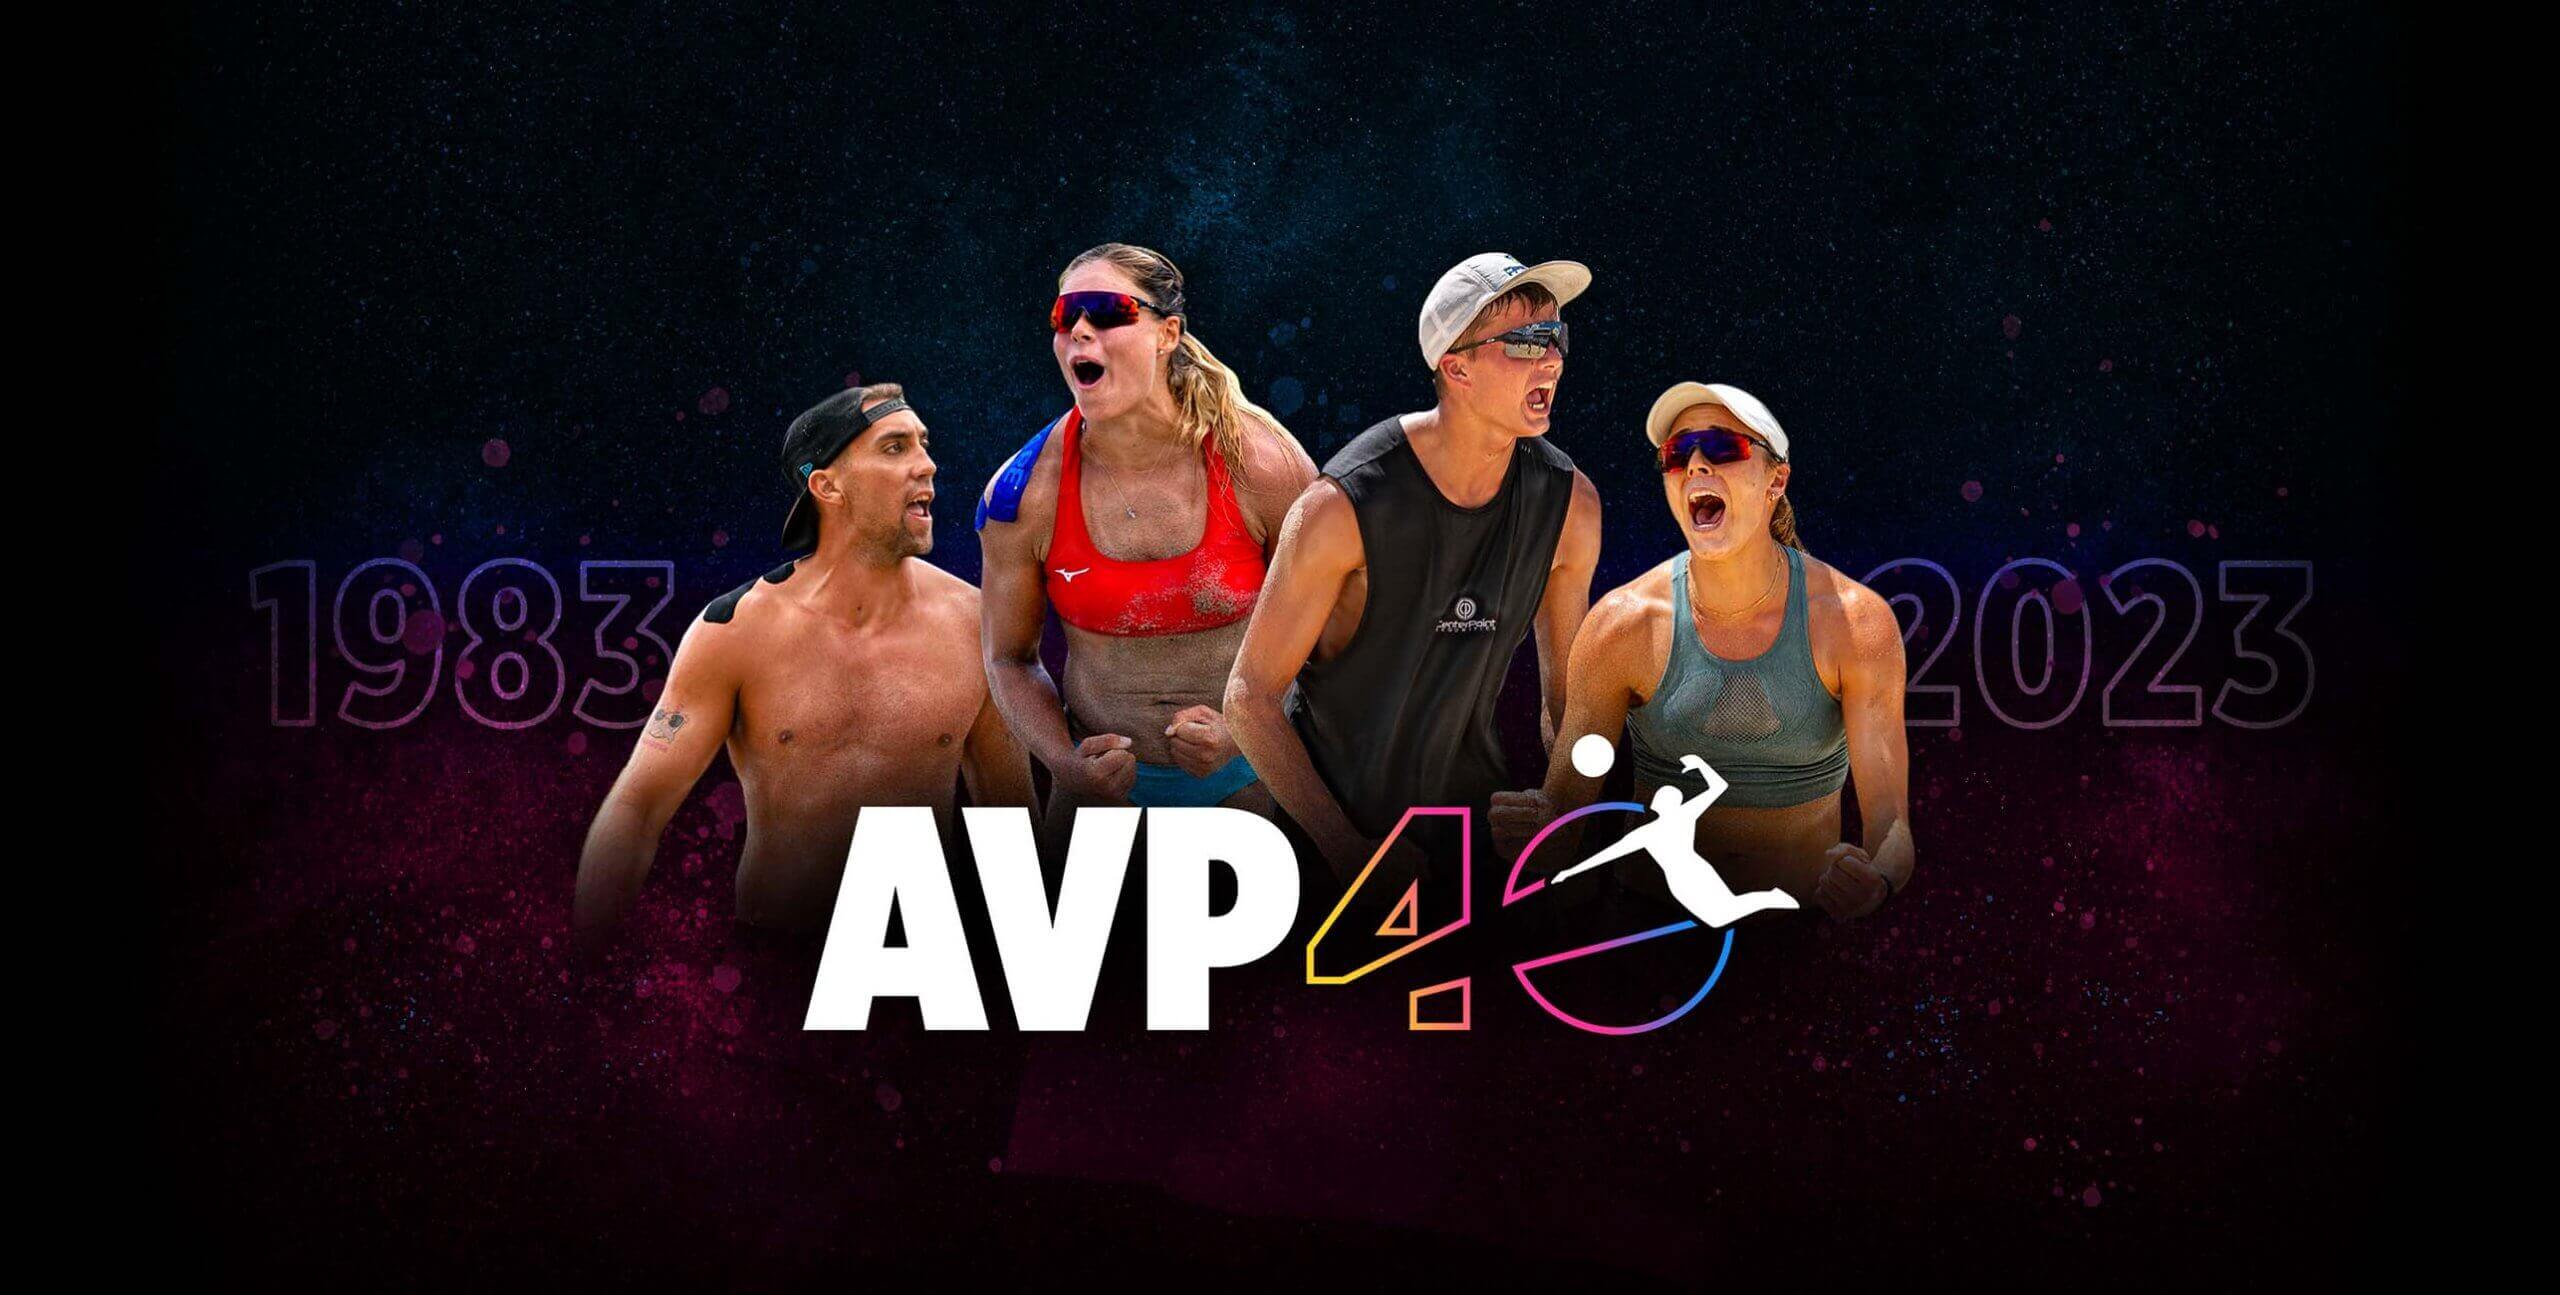 Association of Volleyball Professionals